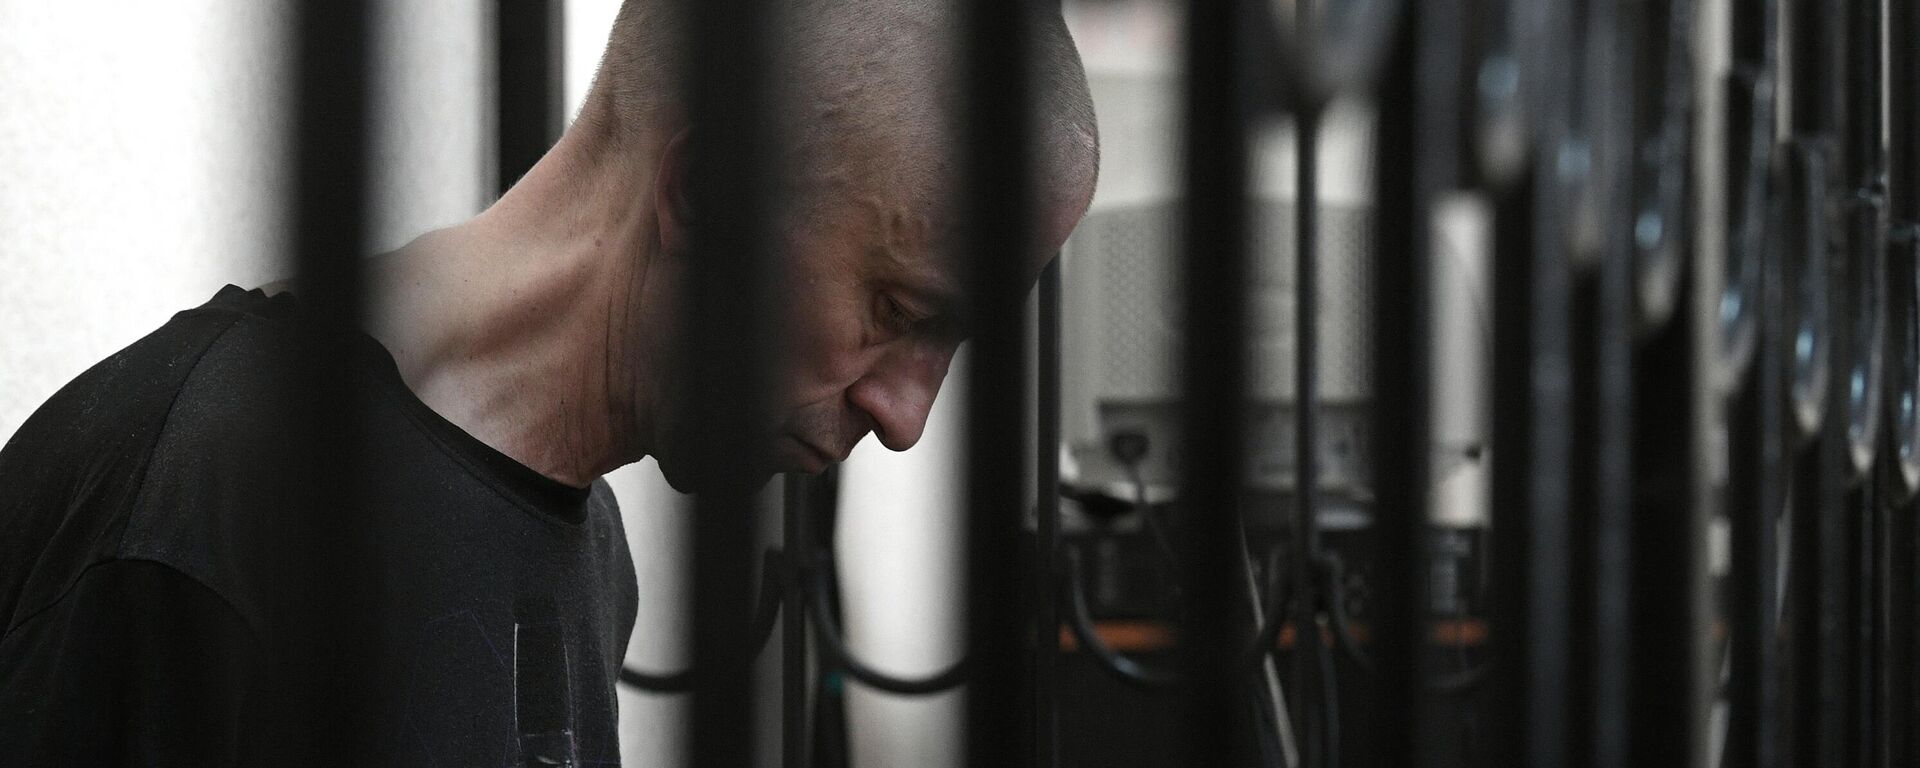 British citizen Shaun Pinner, surrounded by Russian forces after he went to fight in Ukraine and accused of being a foreign mercenaries, sits inside a defendants' cage as he attends a court hearing in Donetsk, Donetsk People's Republic - Sputnik International, 1920, 12.07.2022